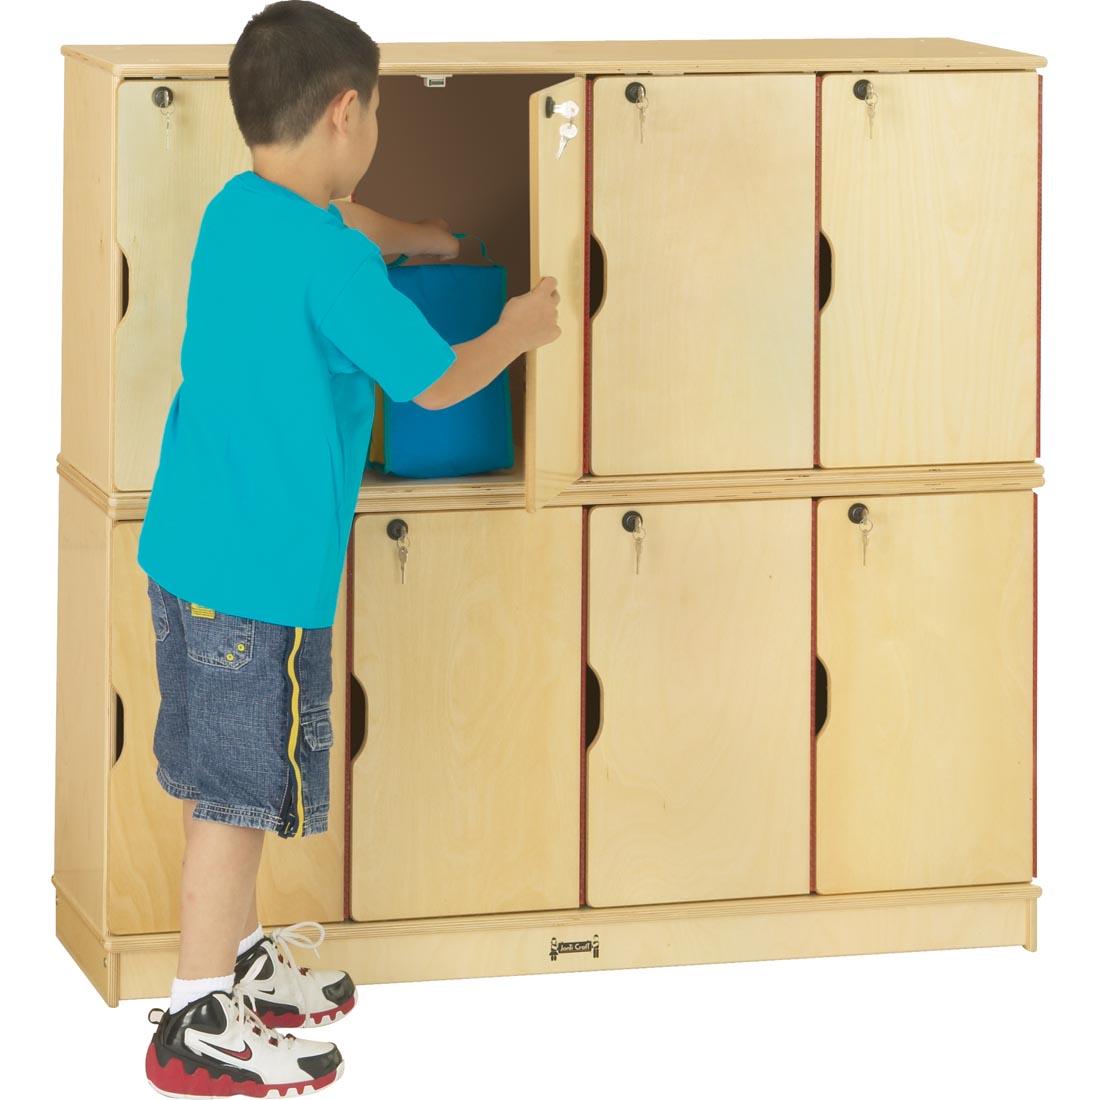 Child putting a lunch bag into the Double Stacking Locker